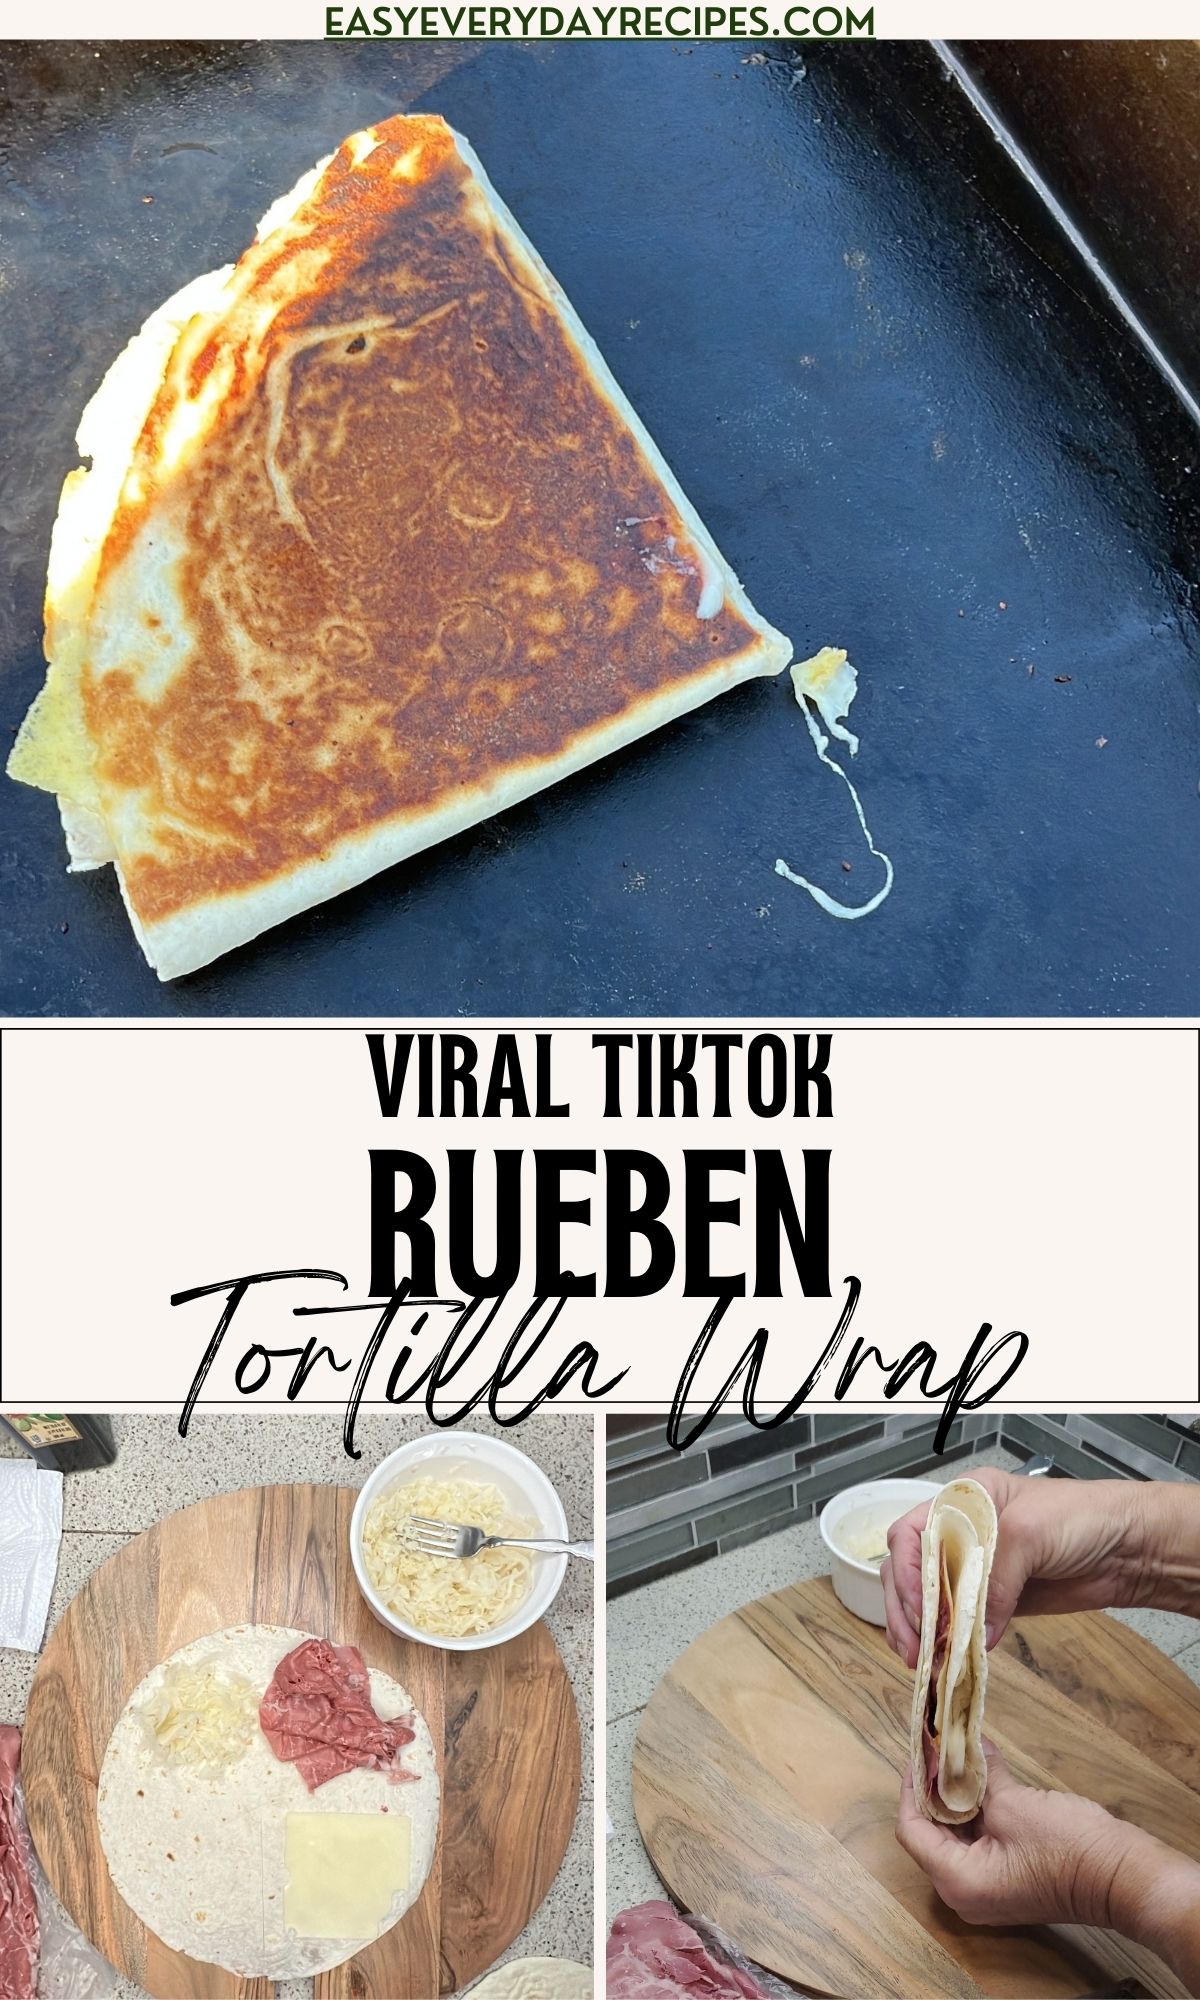 A collage demonstrating the preparation of a "viral tiktok rueben tortilla wrap" from easyeverydayrecipes.com, showing a toasted wrap with fillings, ingredients before folding, and the wrap being folded.